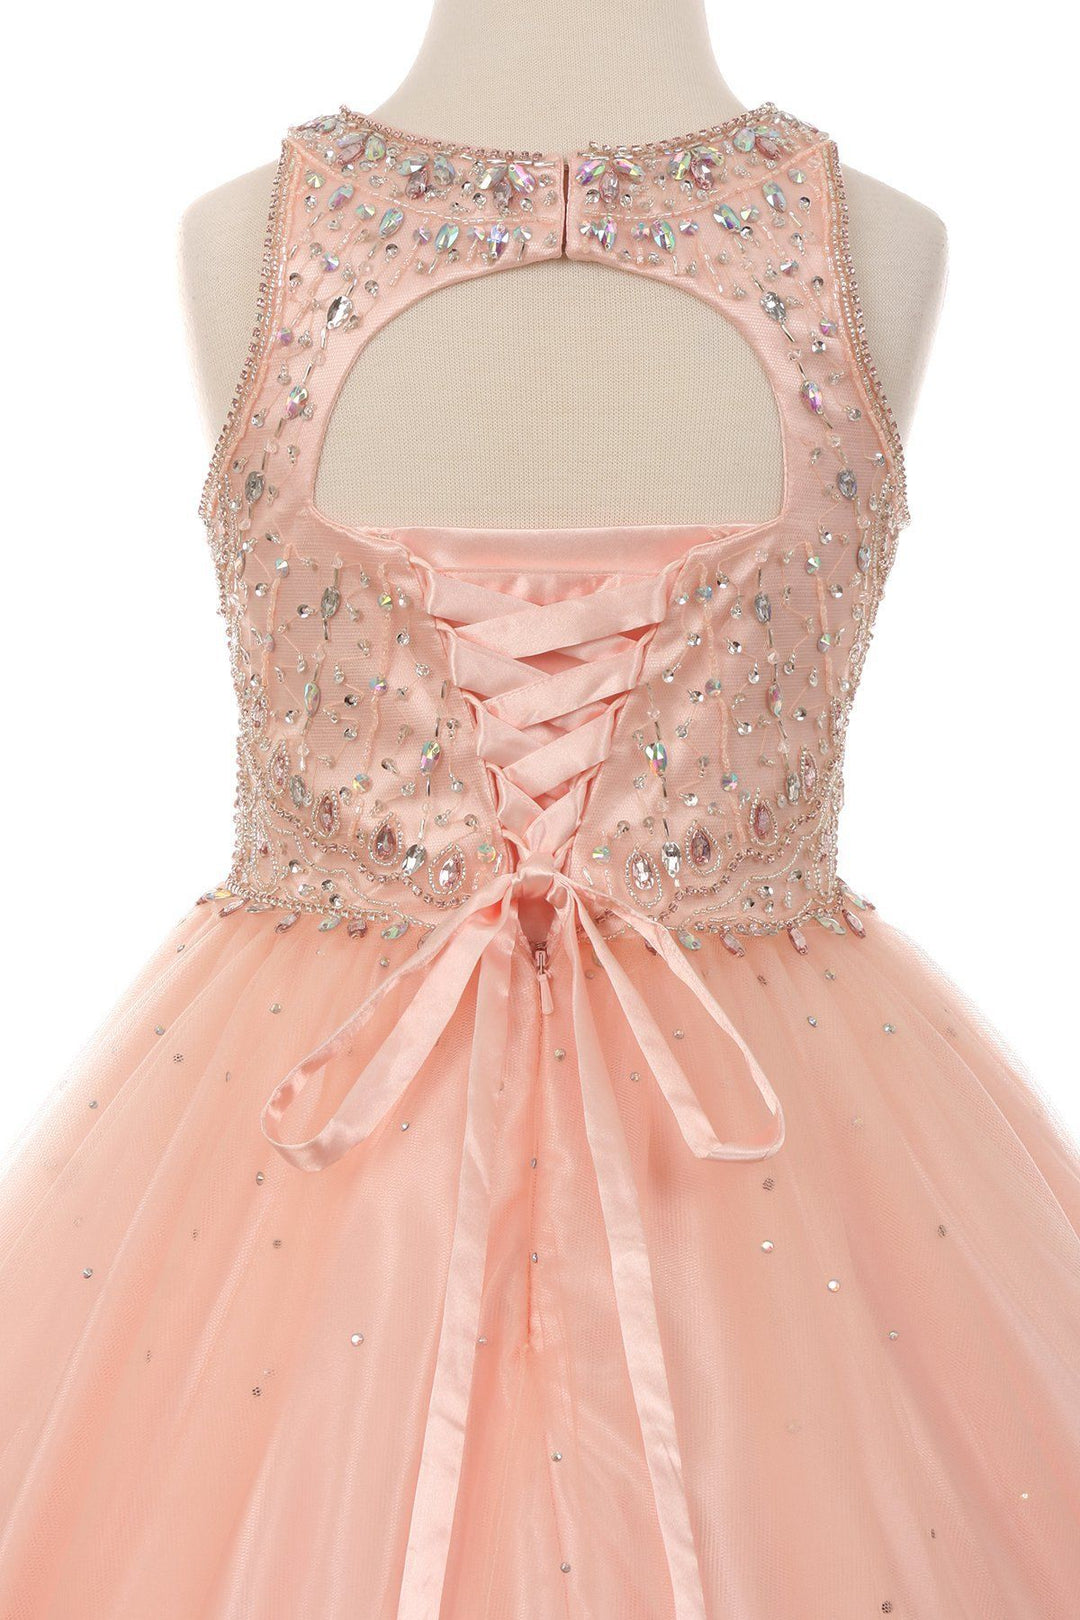 Girls Long Halter Tulle Dress with Beaded Illusion Bodice-Girls Formal Dresses-ABC Fashion